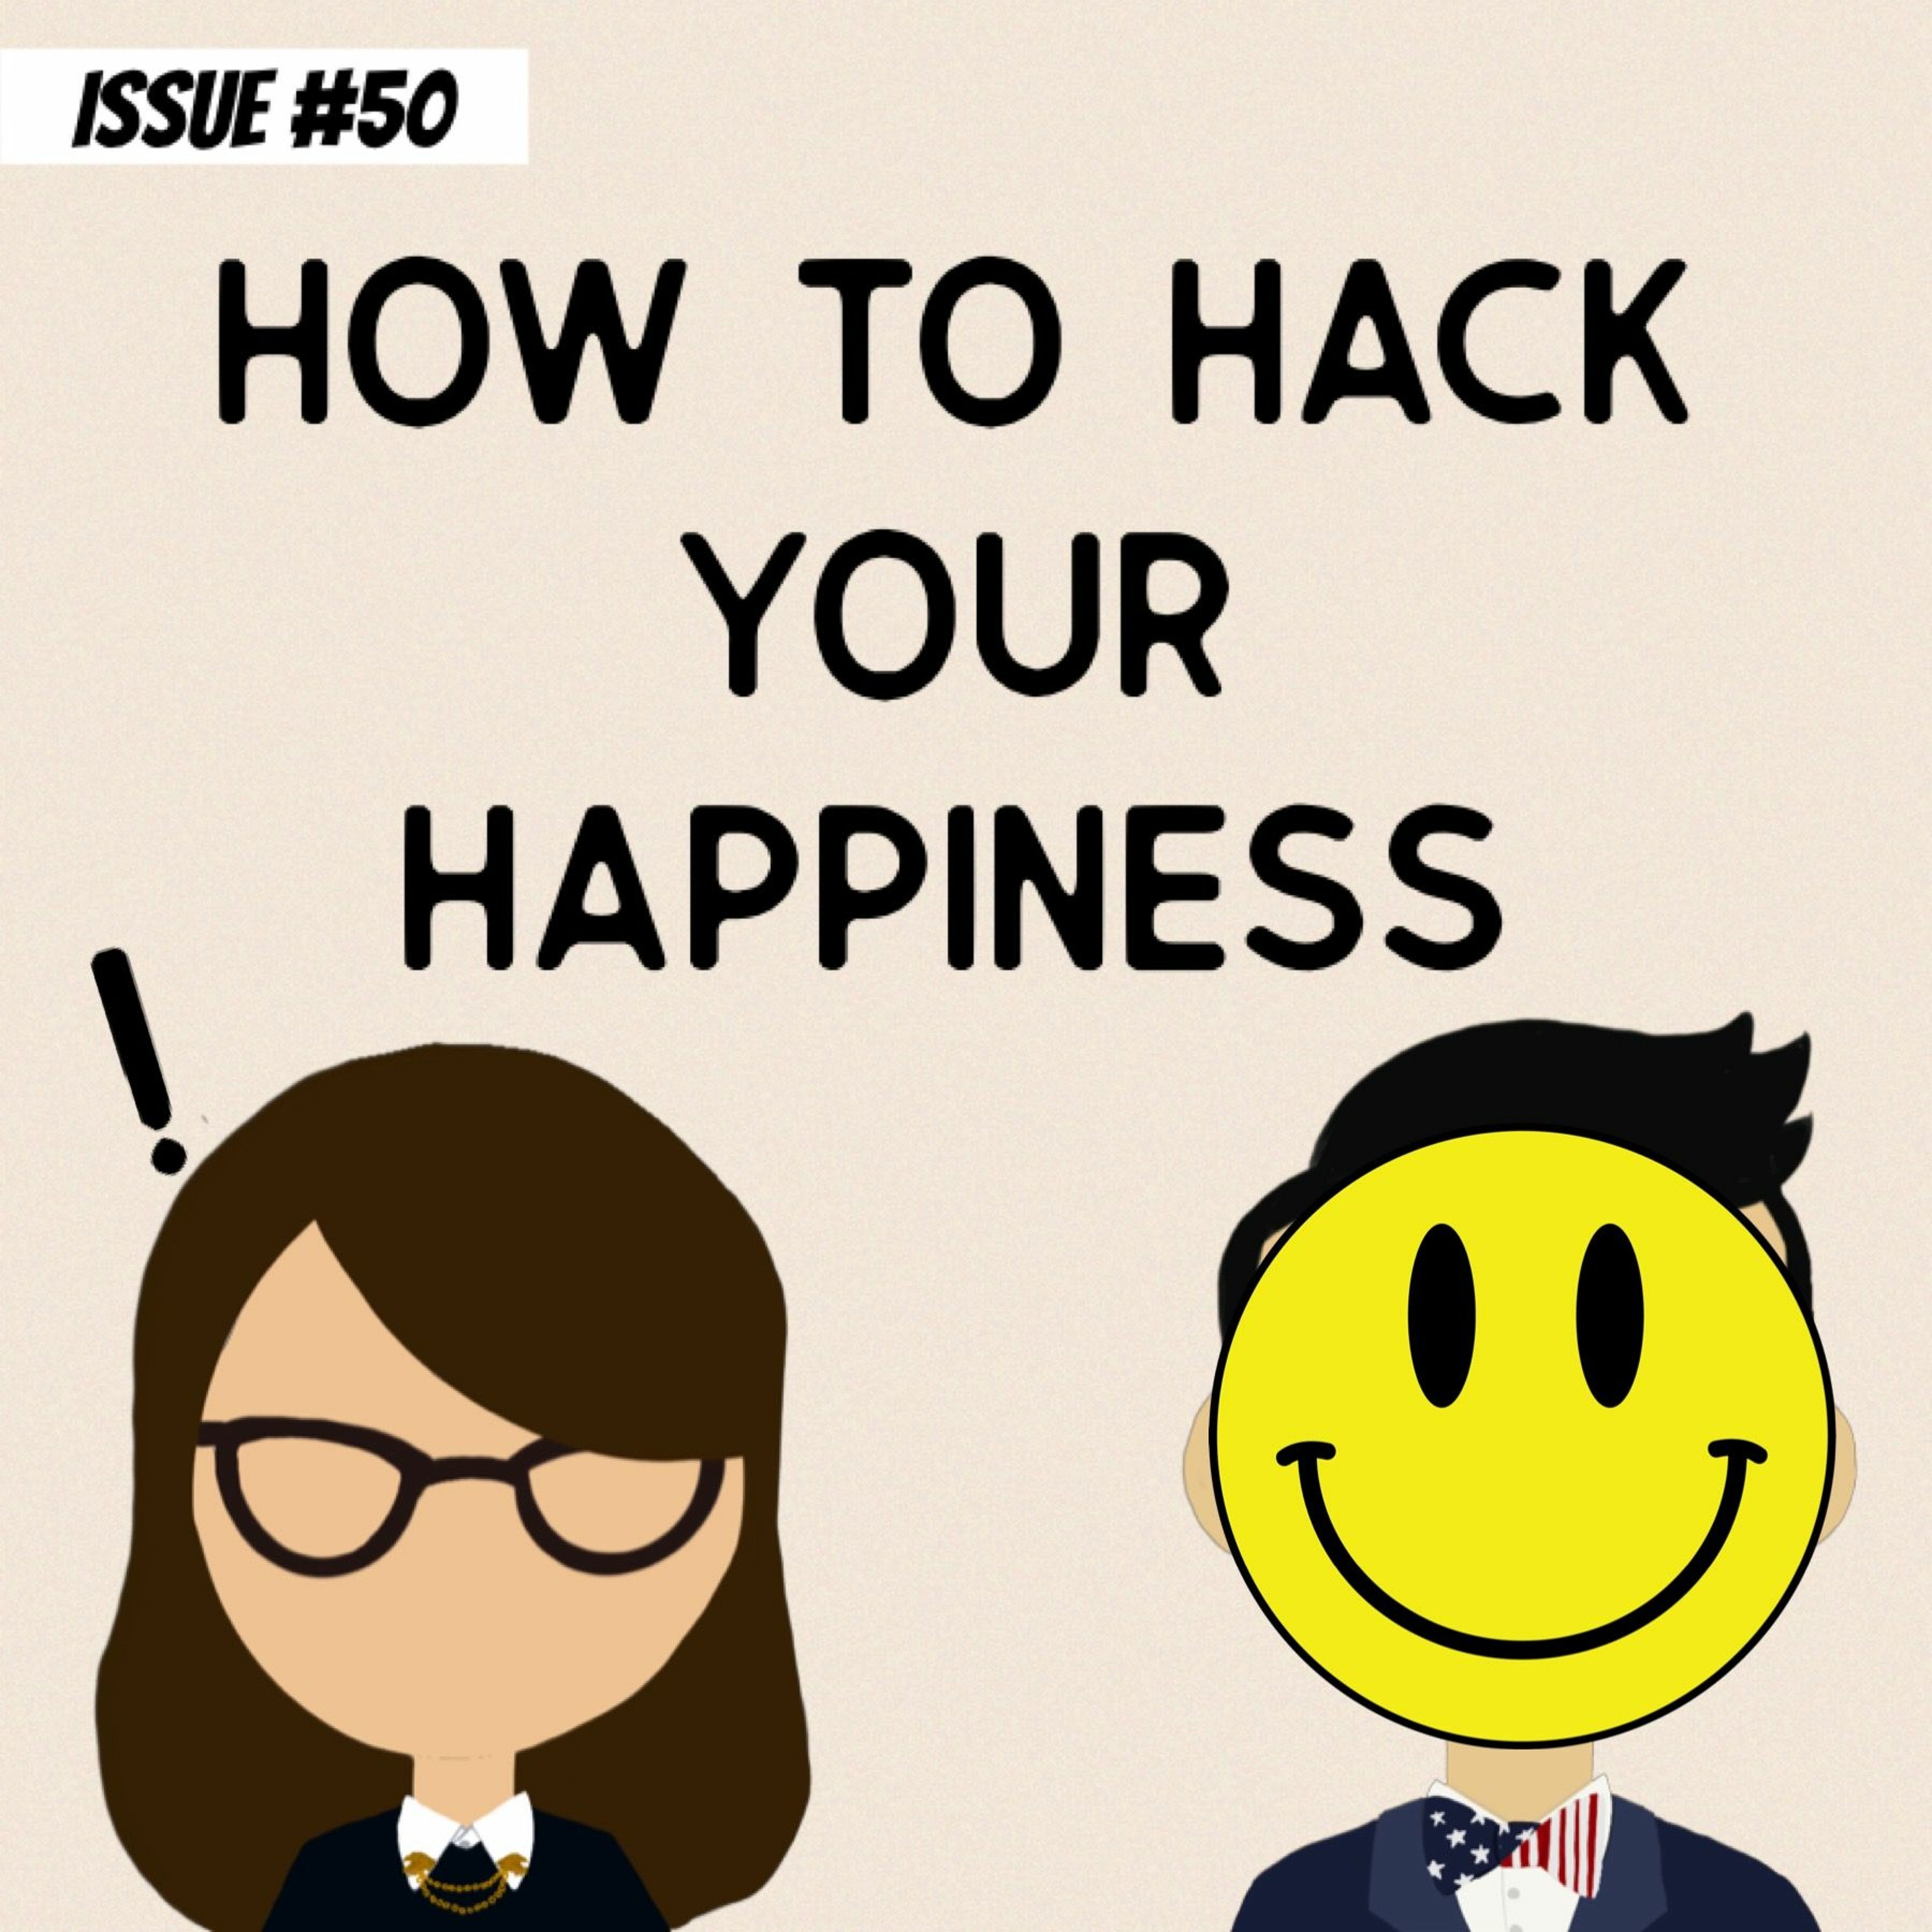 How to hack your happiness